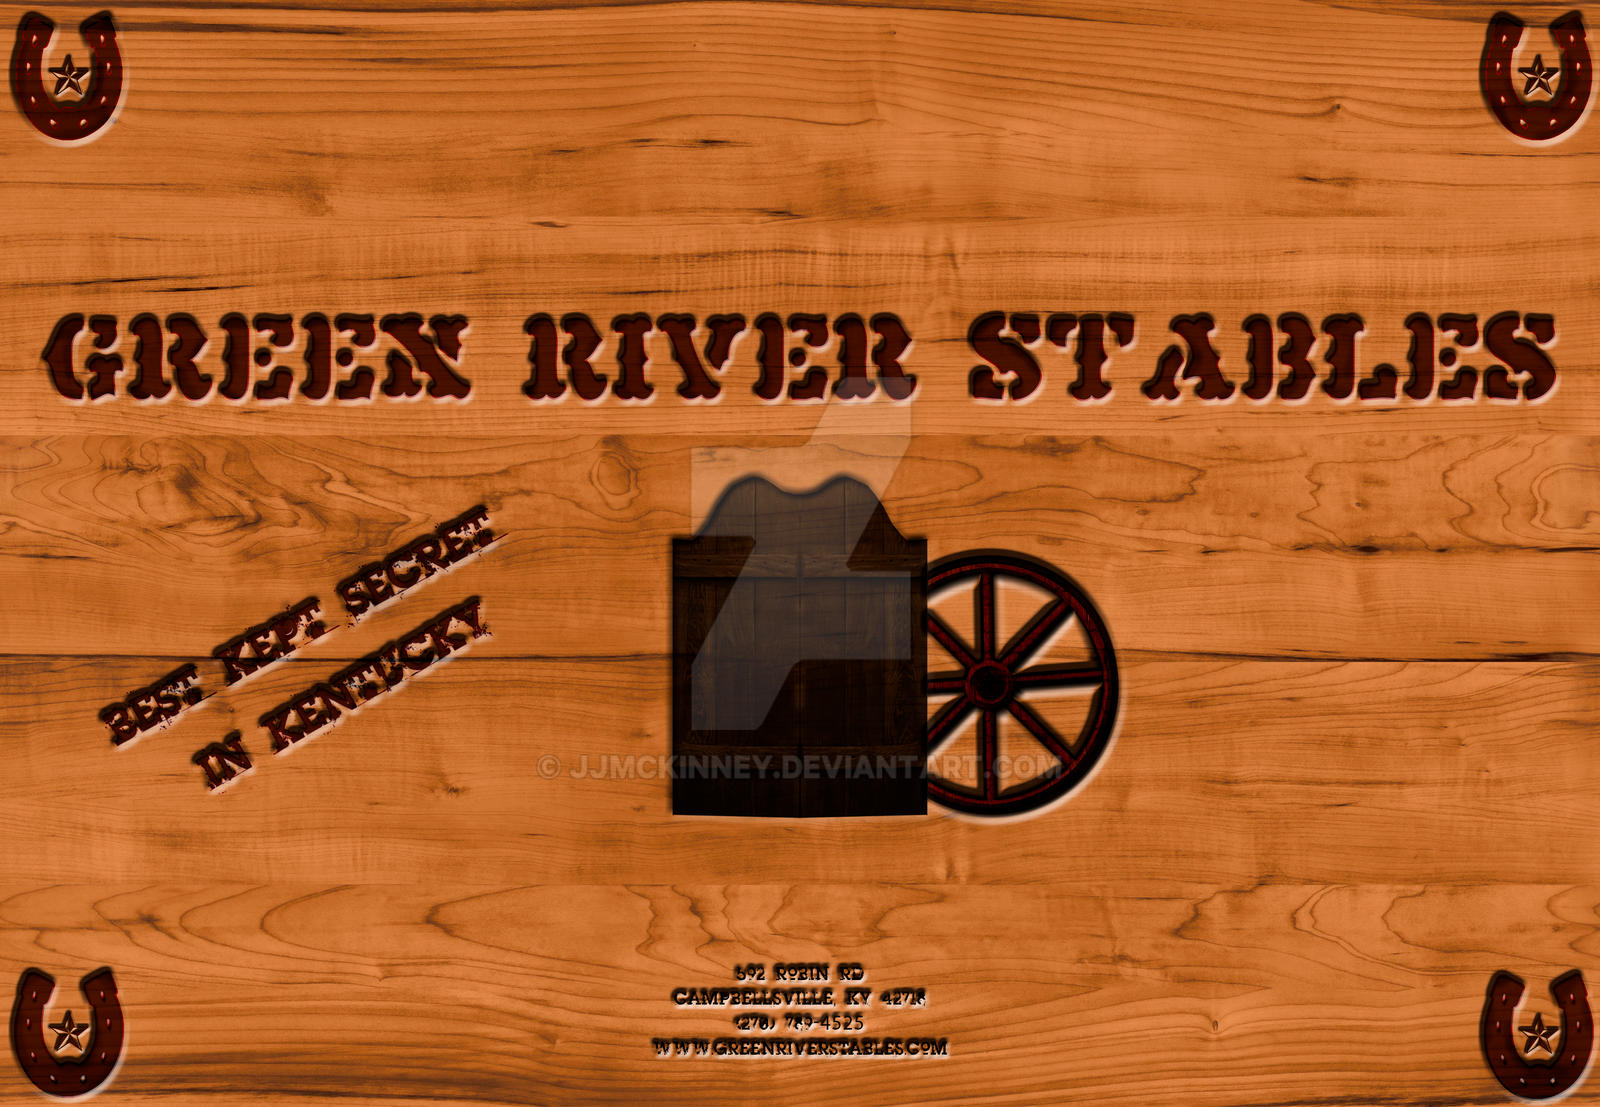 Green River Stables Ad